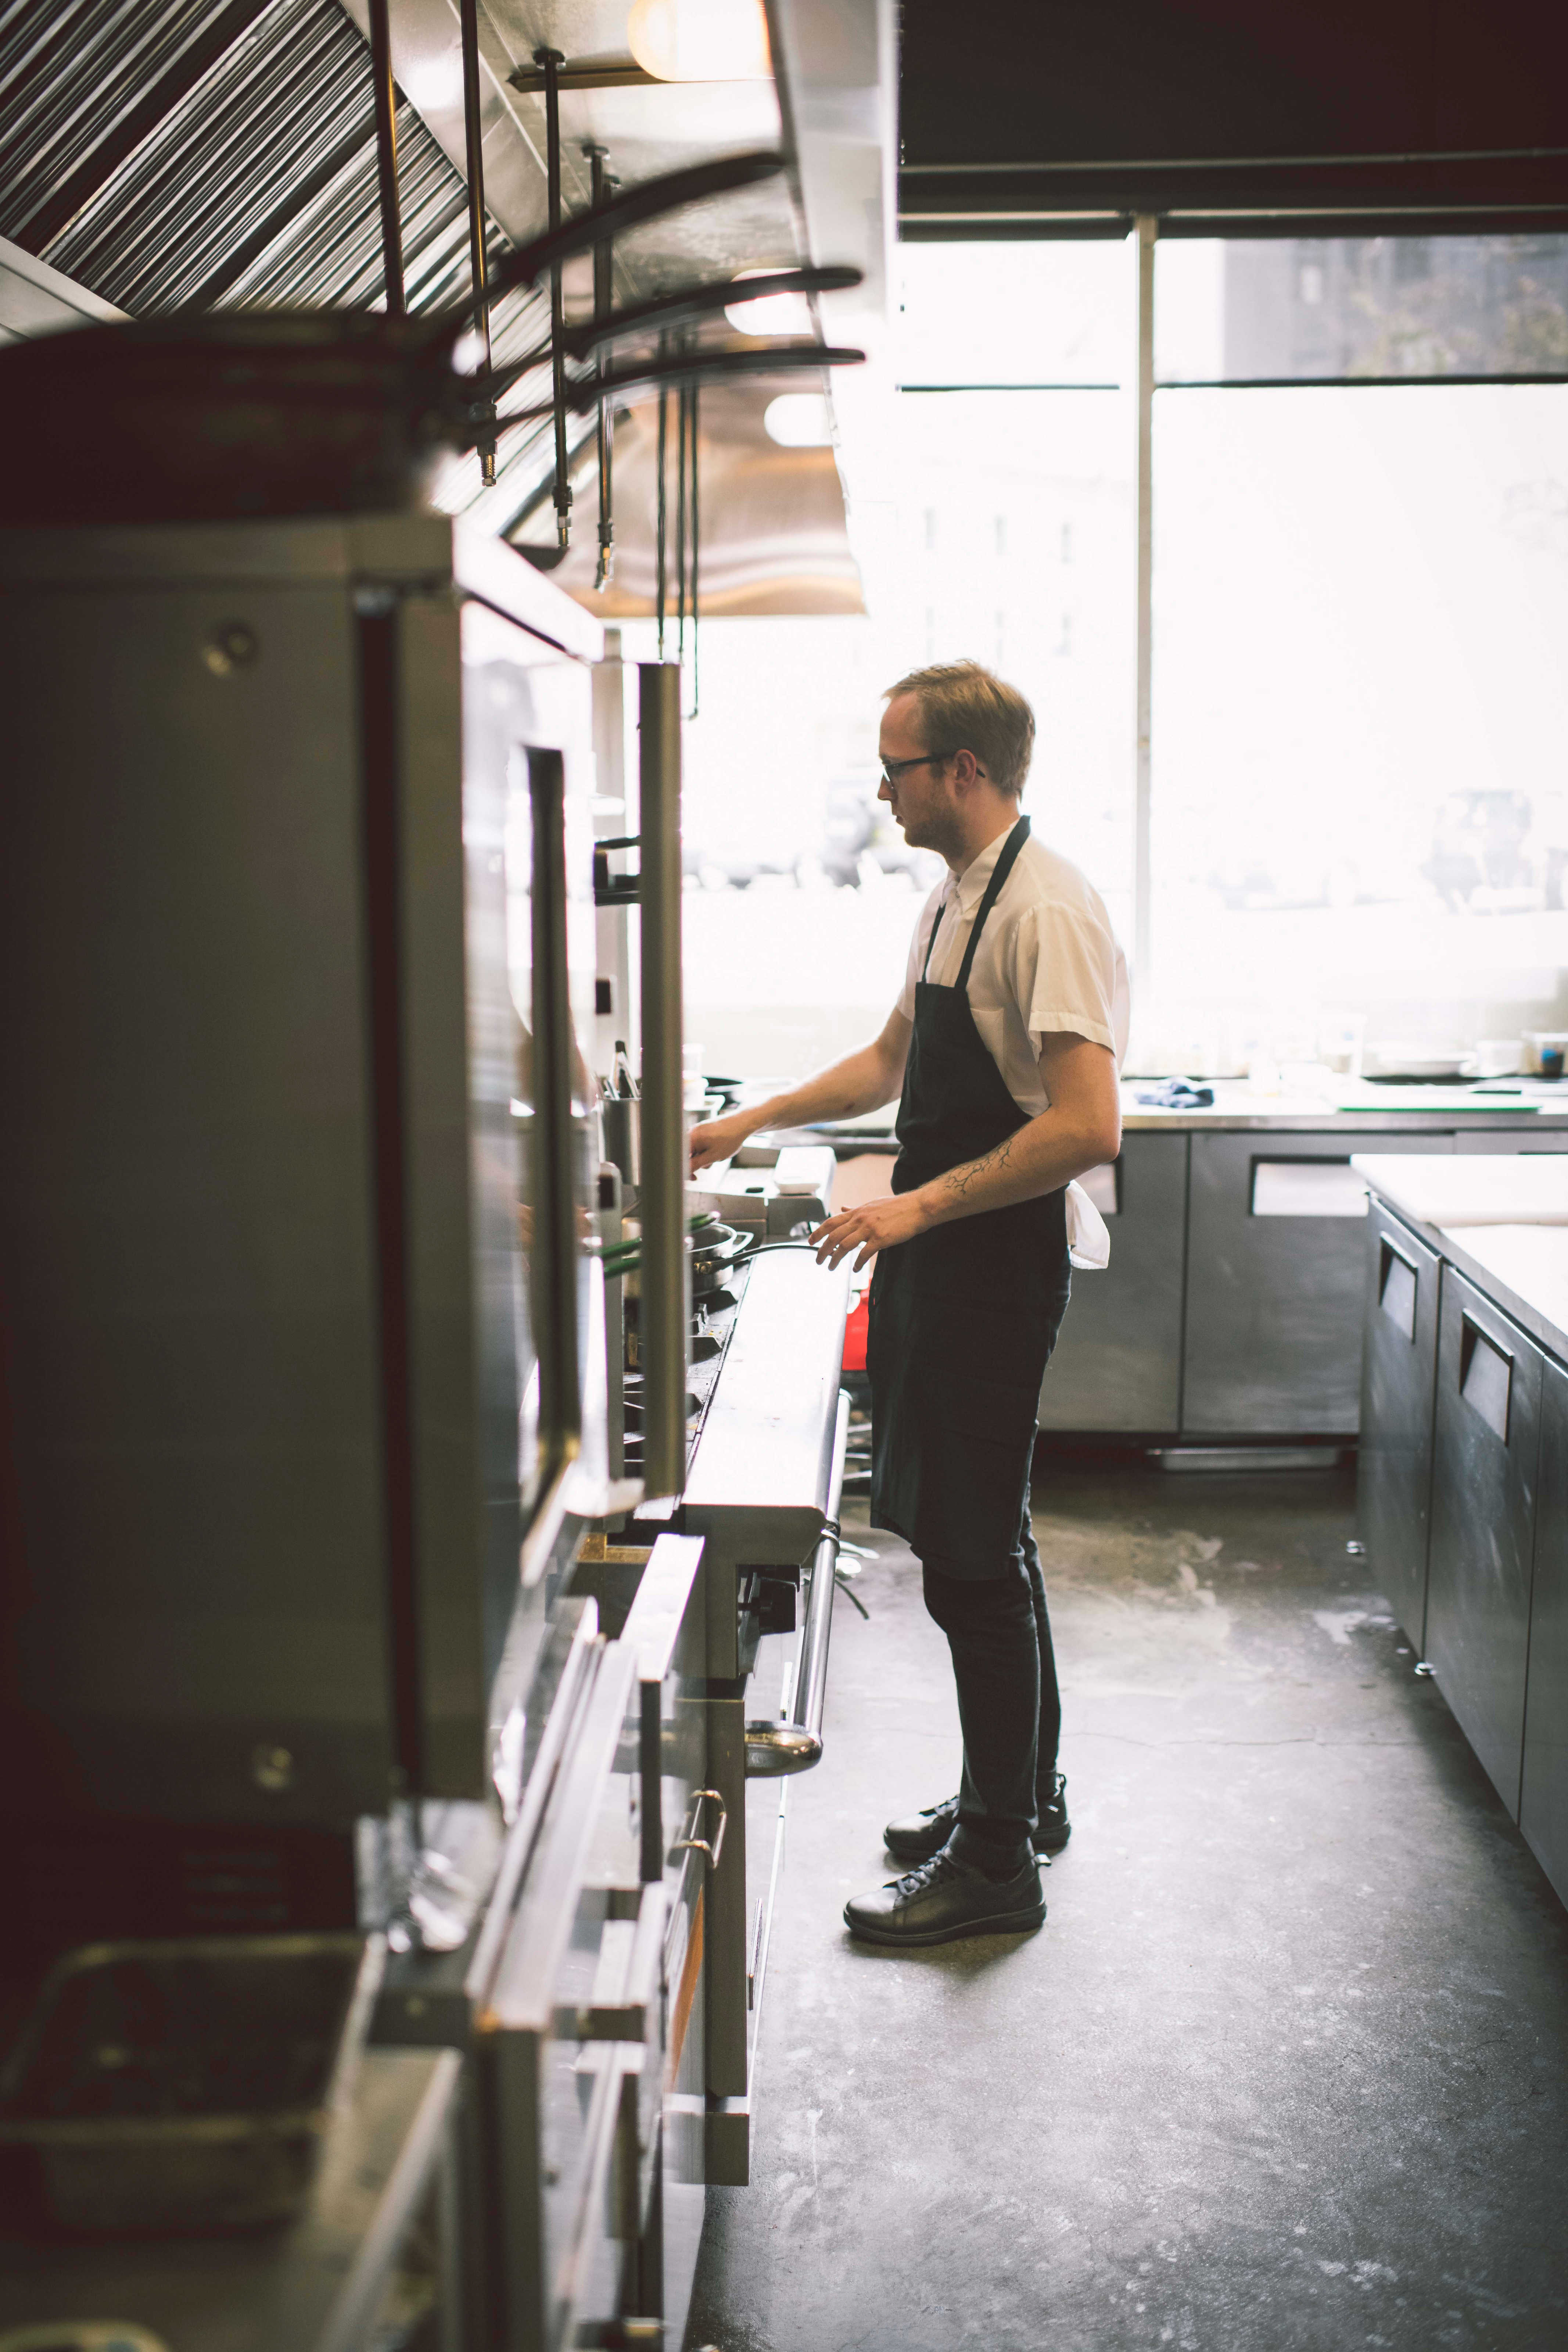 A chef stands at a commercial stove in the kitchen of a restaurants